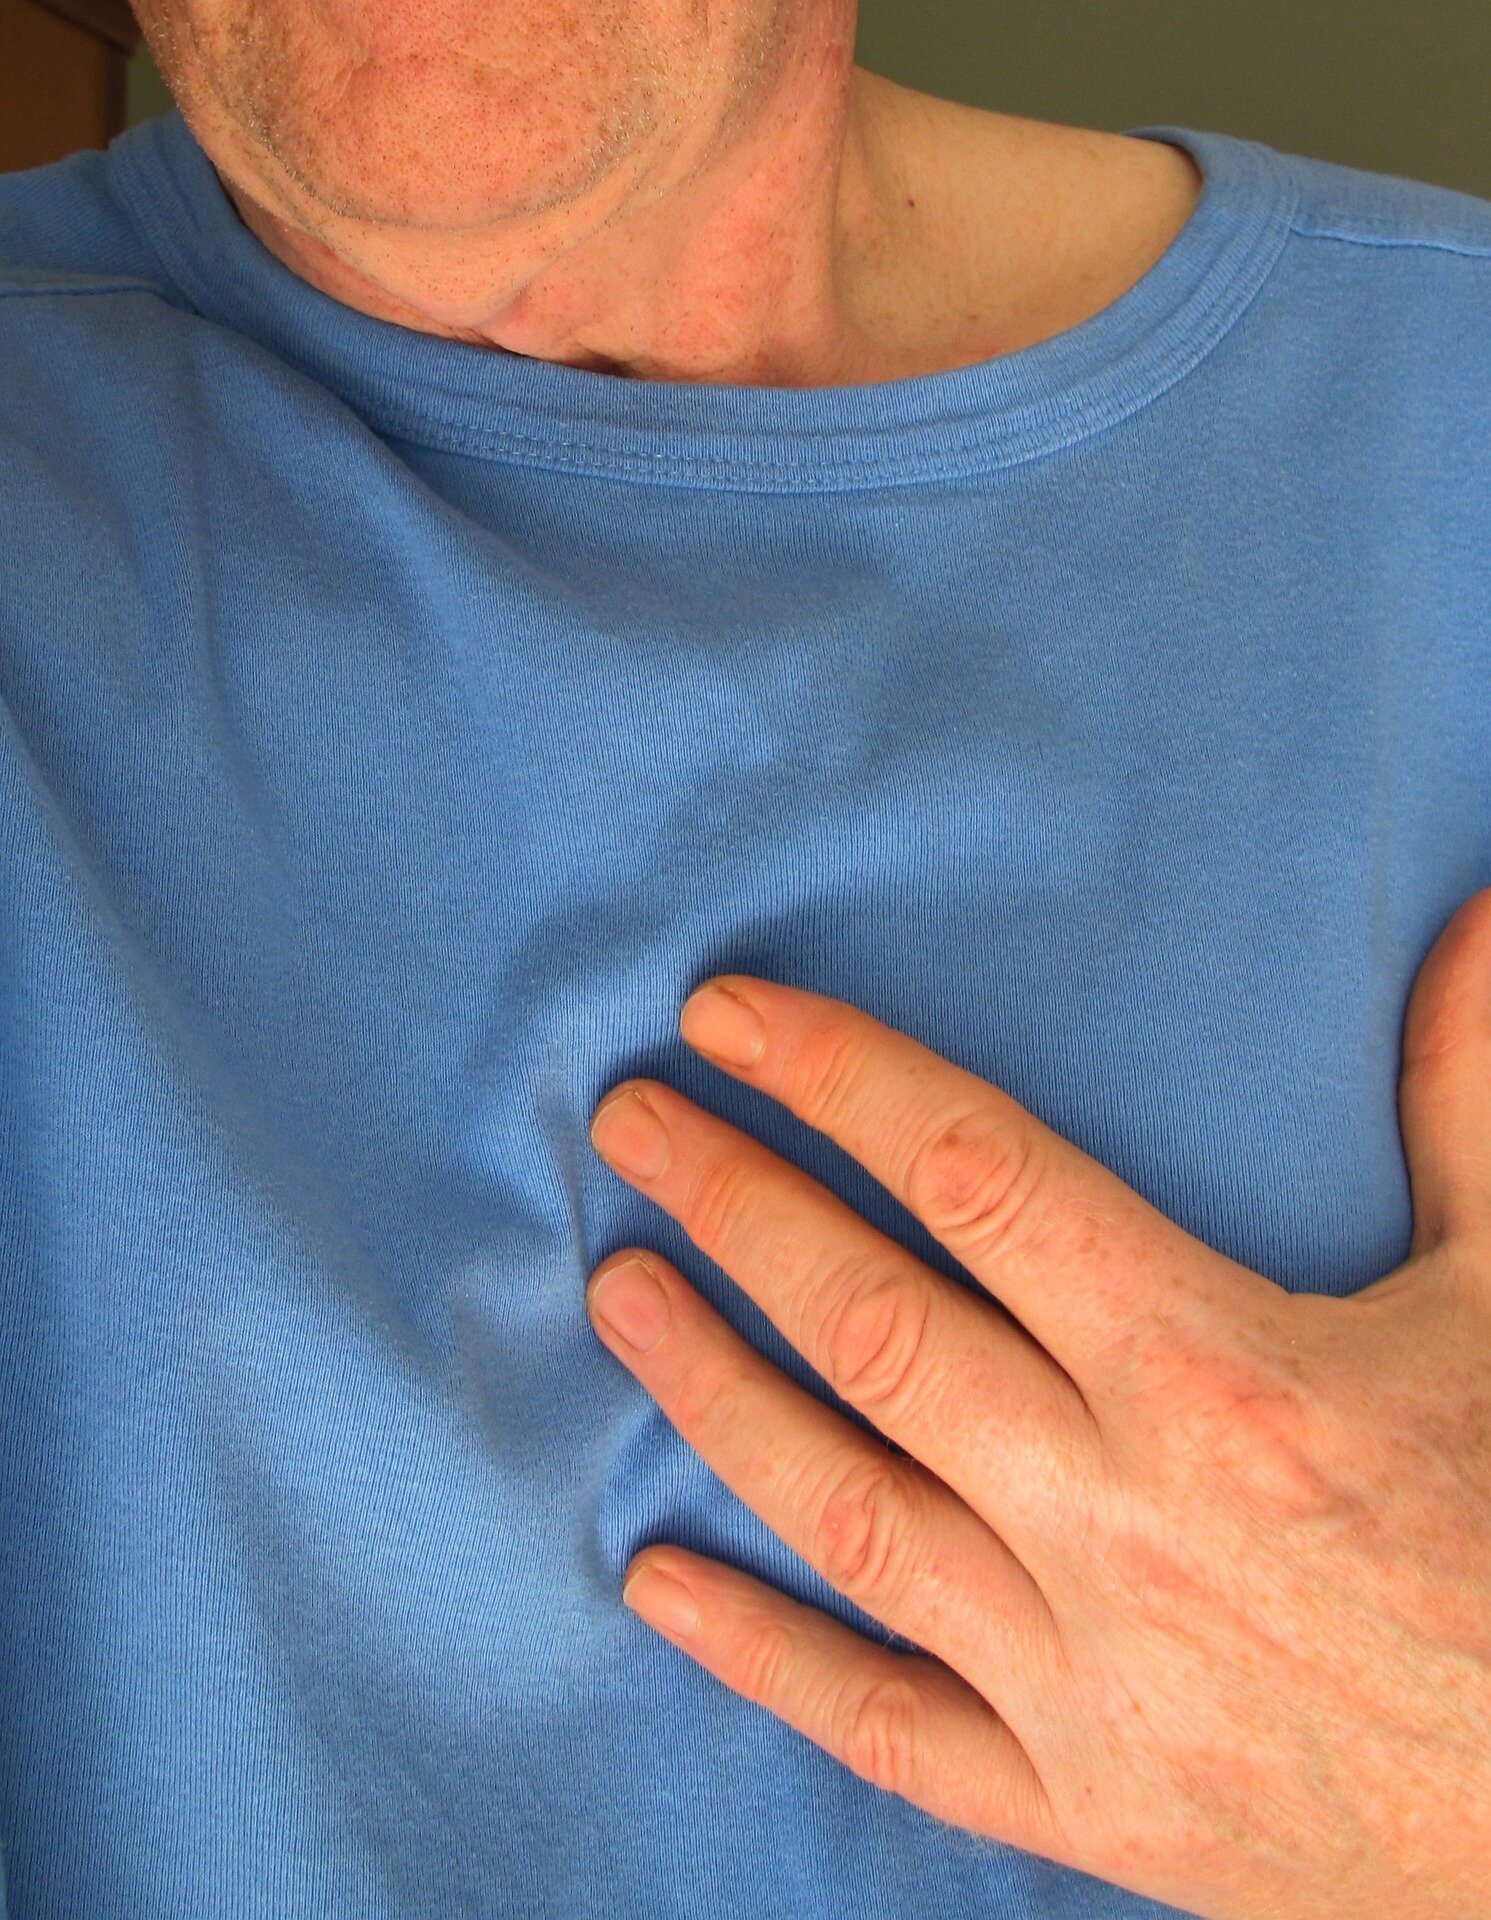 Home test reveals the risk of heart attack in five minutes